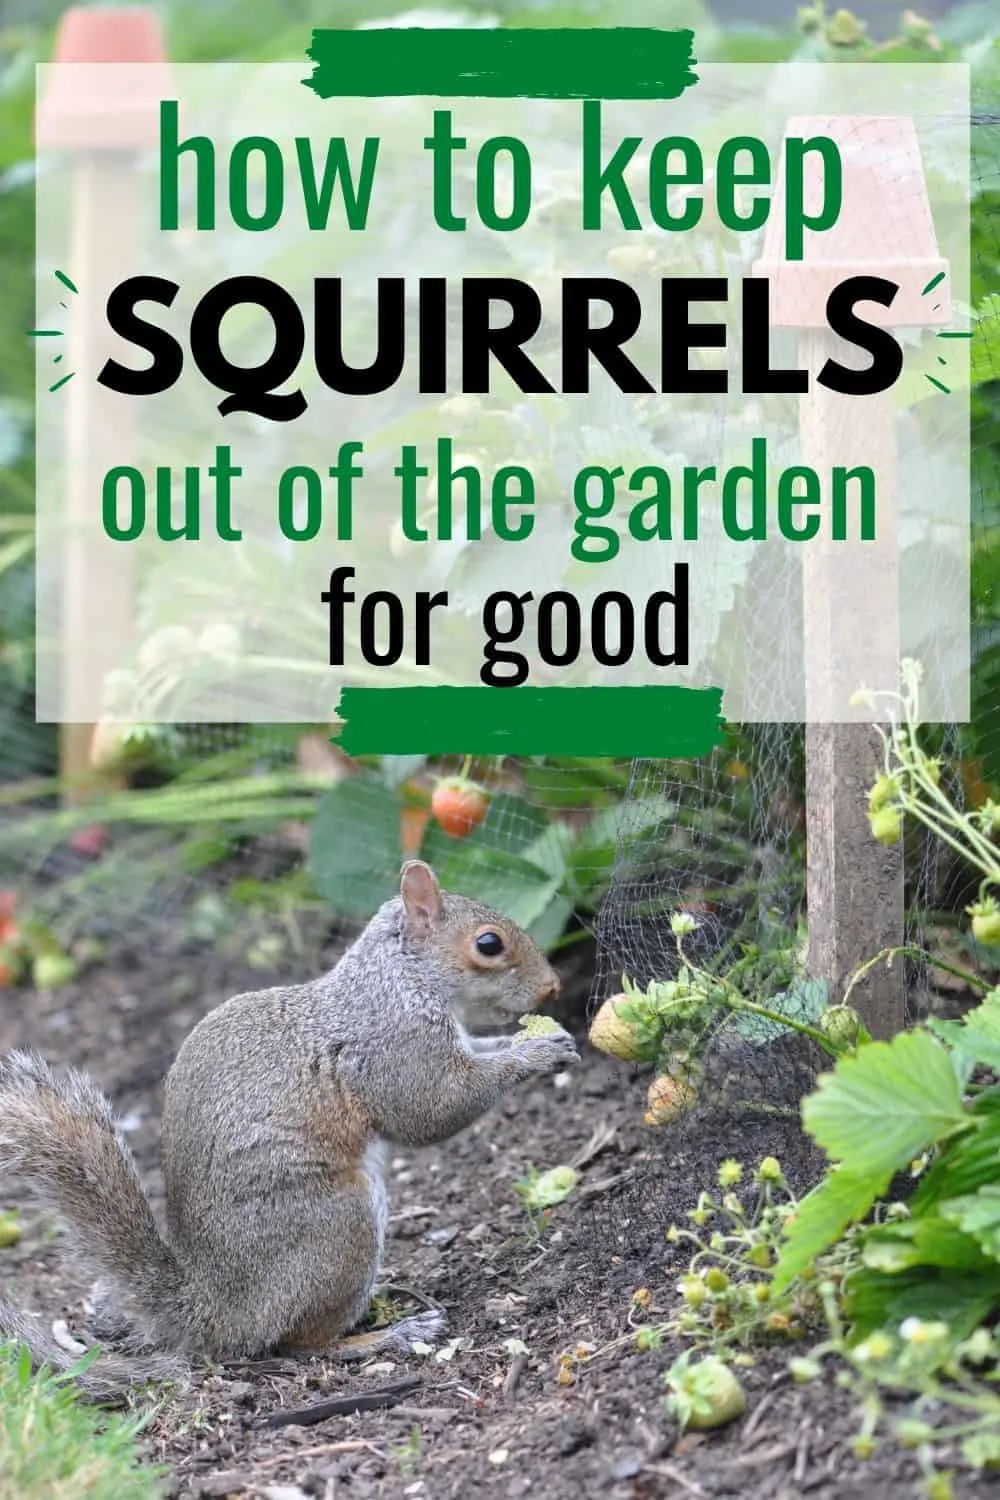 How To Keep Squirrels Out Of Plants How To Keep Squirrels Out Of The Garden For Good